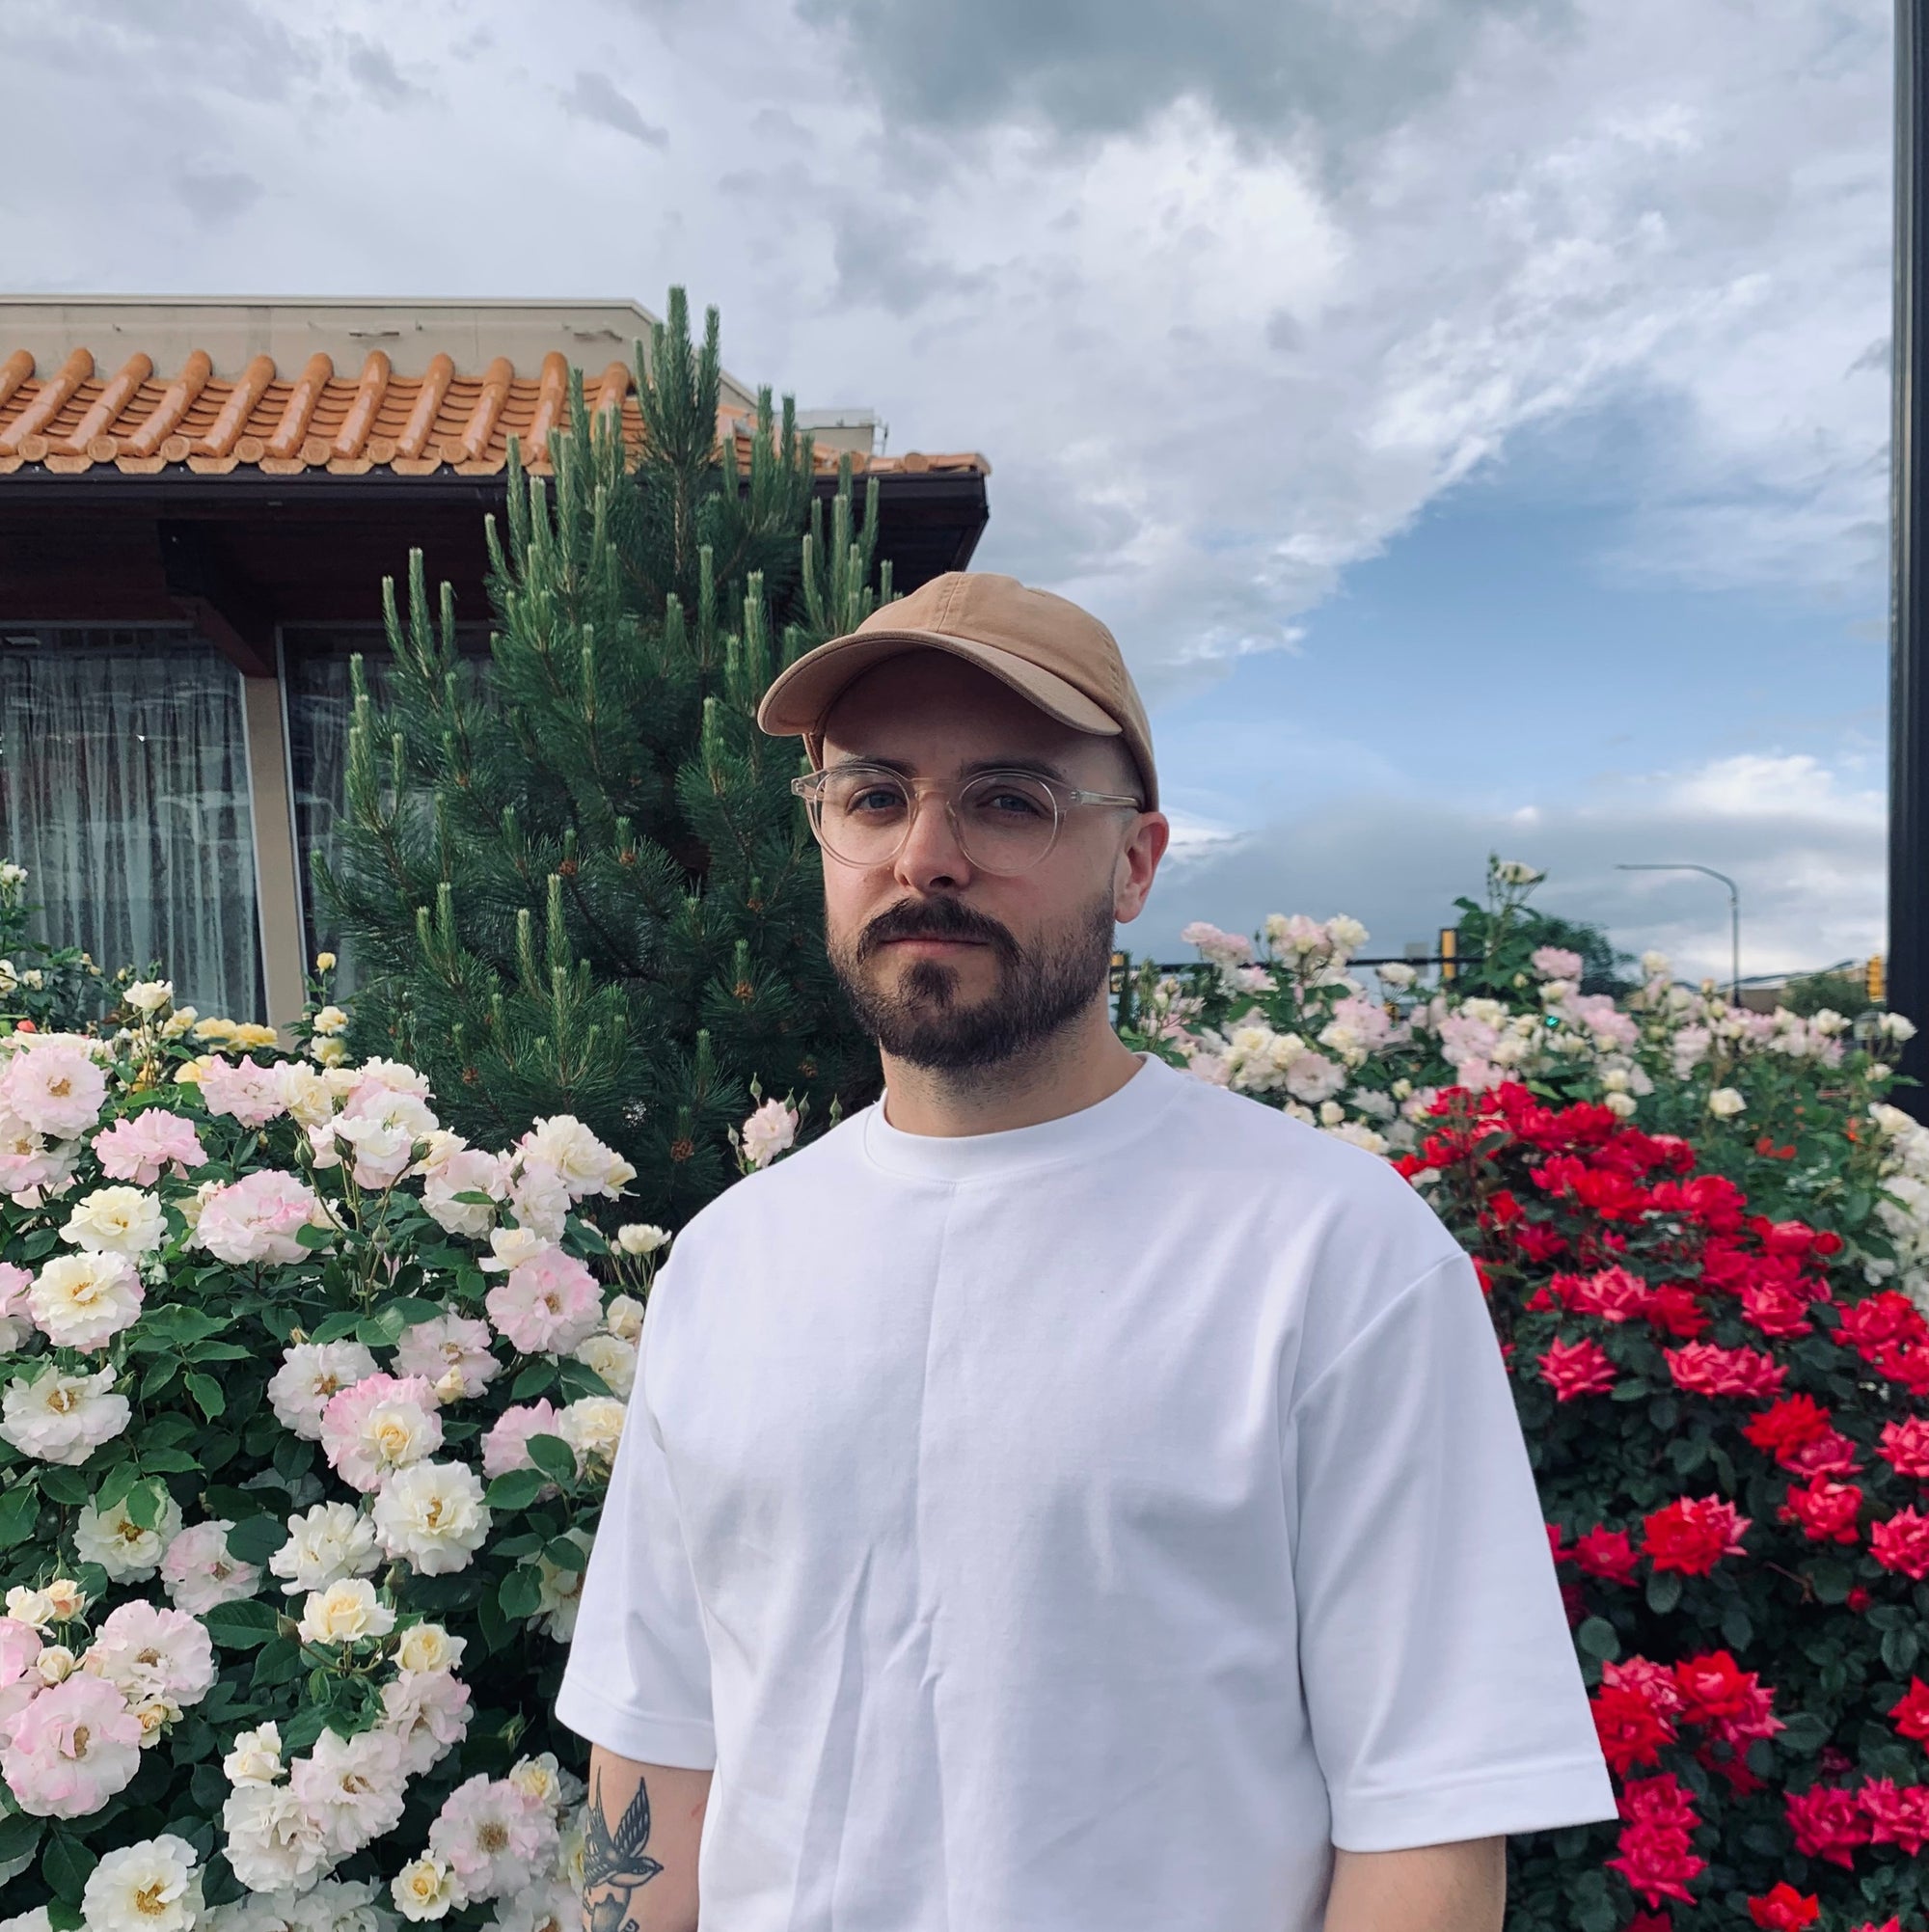 Utah’s Caleb Darger navigates life's fault lines with new single ‘Matter of Time’